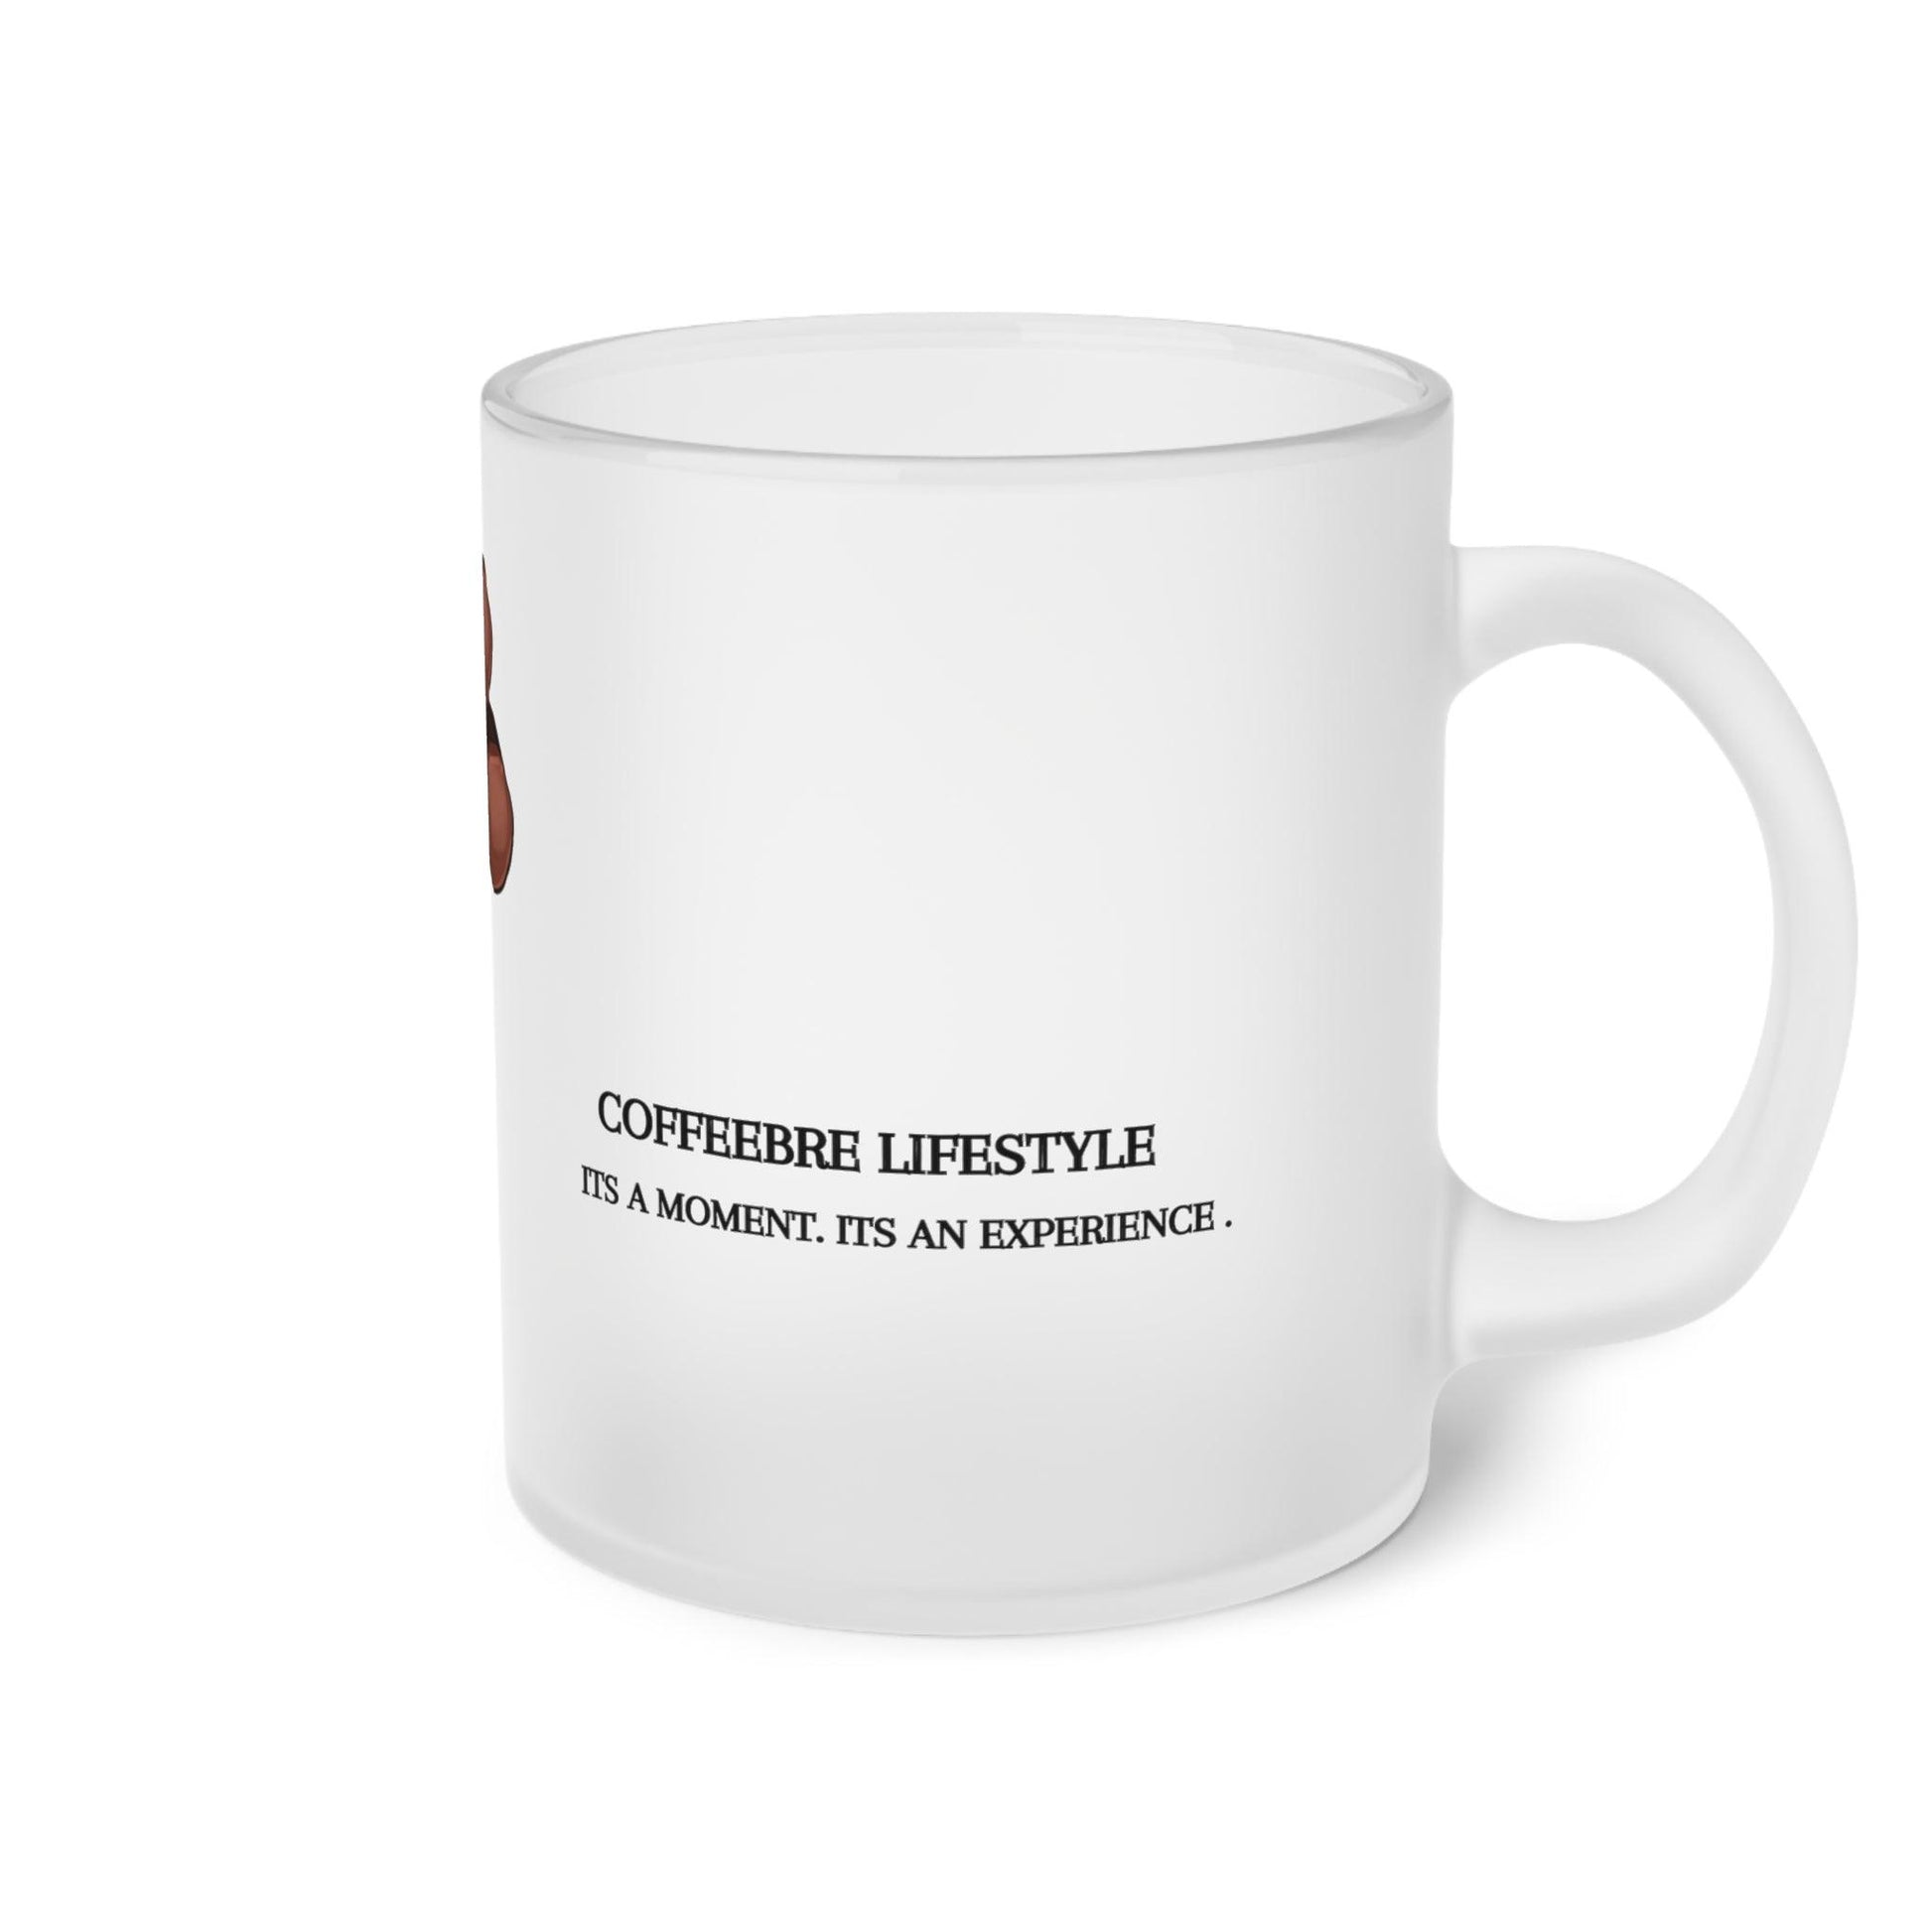 Roasted Coffee Bean Frosted Glass Mug - COFFEEBRE